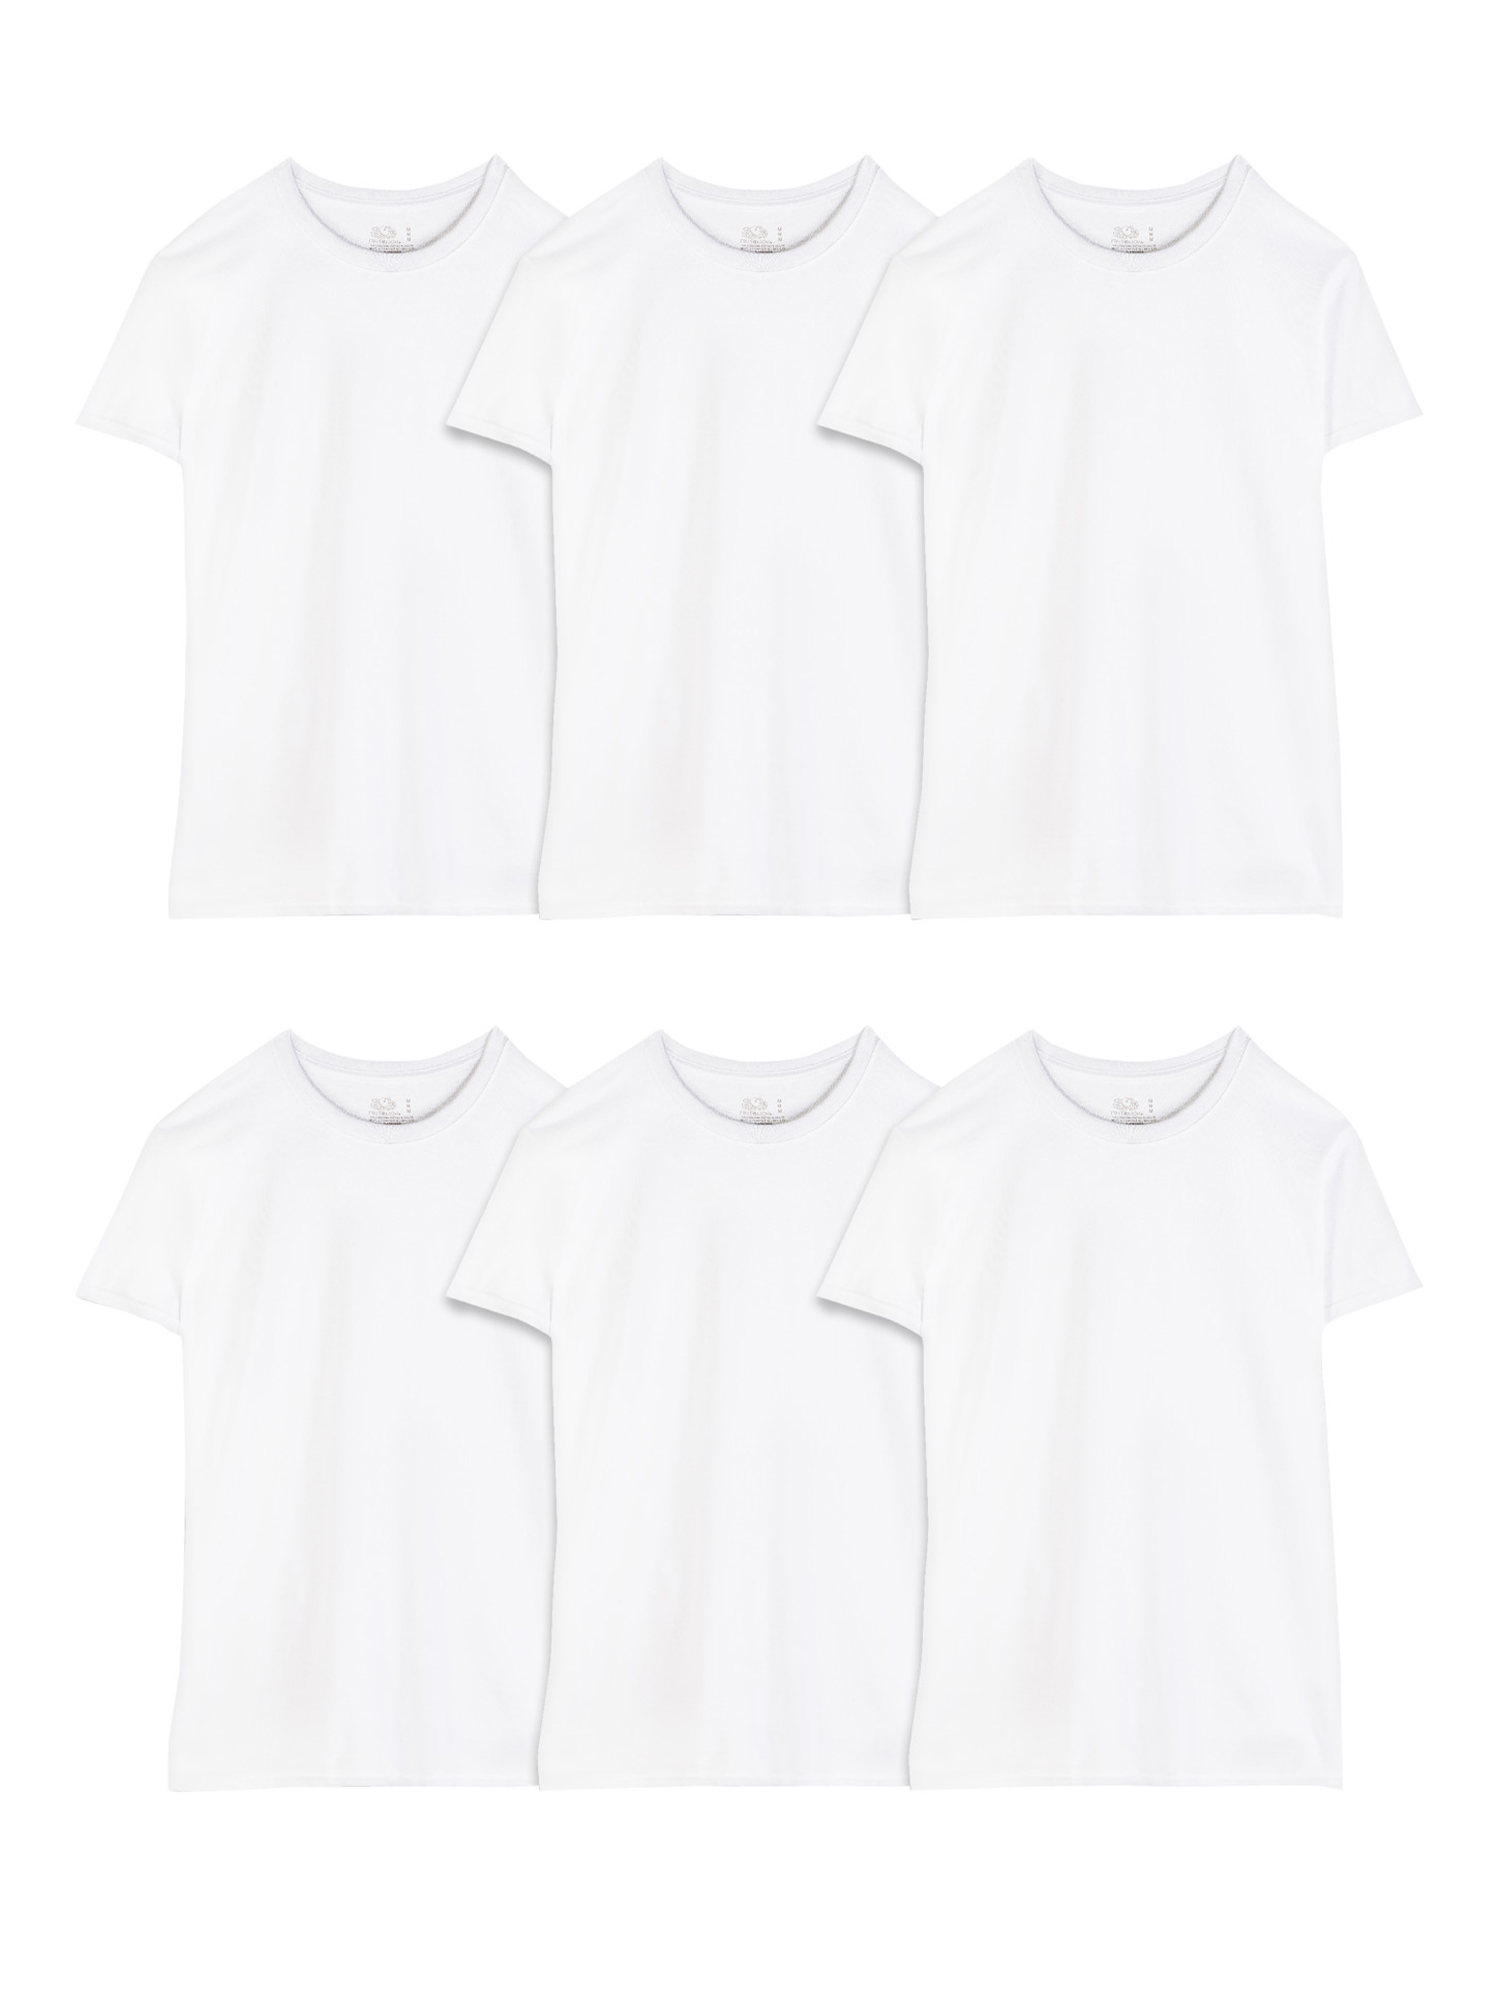 Fruit of the Loom Men's Crew Undershirts, 6 Pack - image 1 of 13